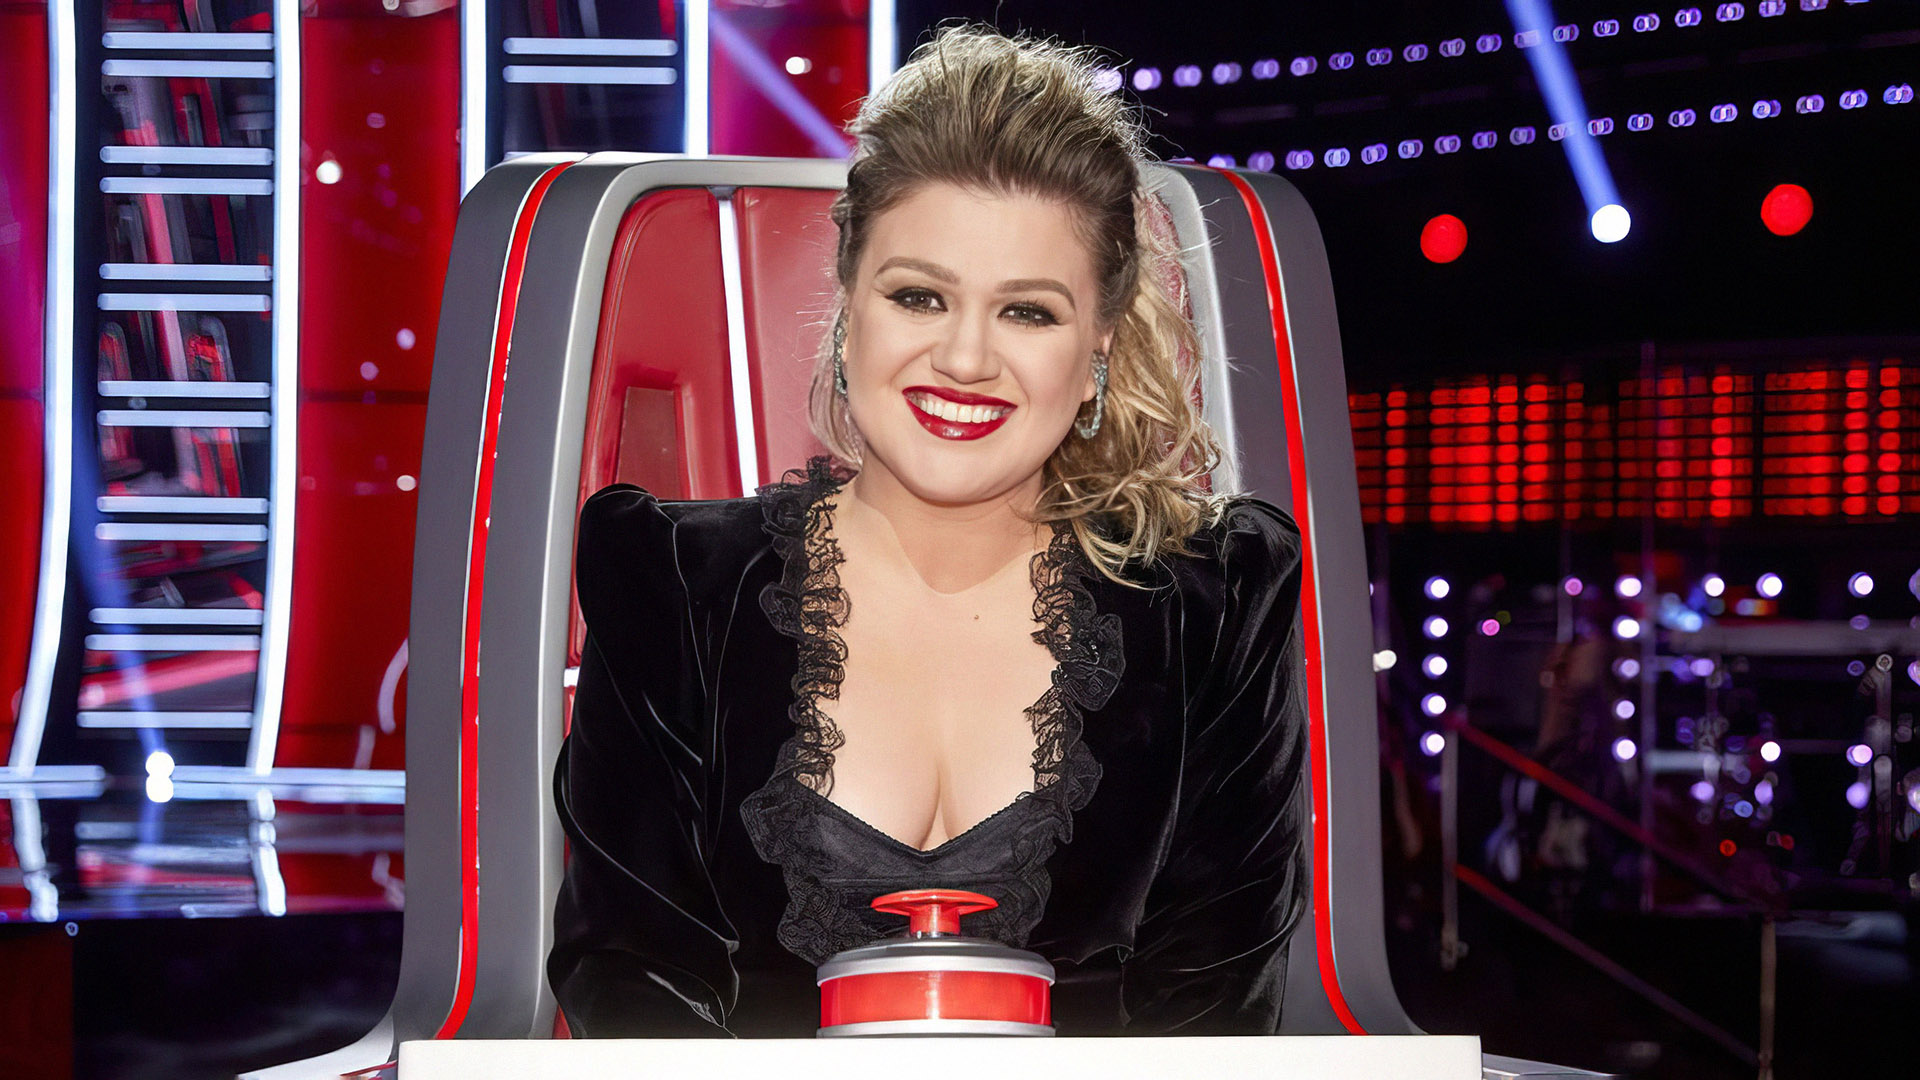 Will Kelly Clarkson Return to The Voice Now That Her Show's in New York?